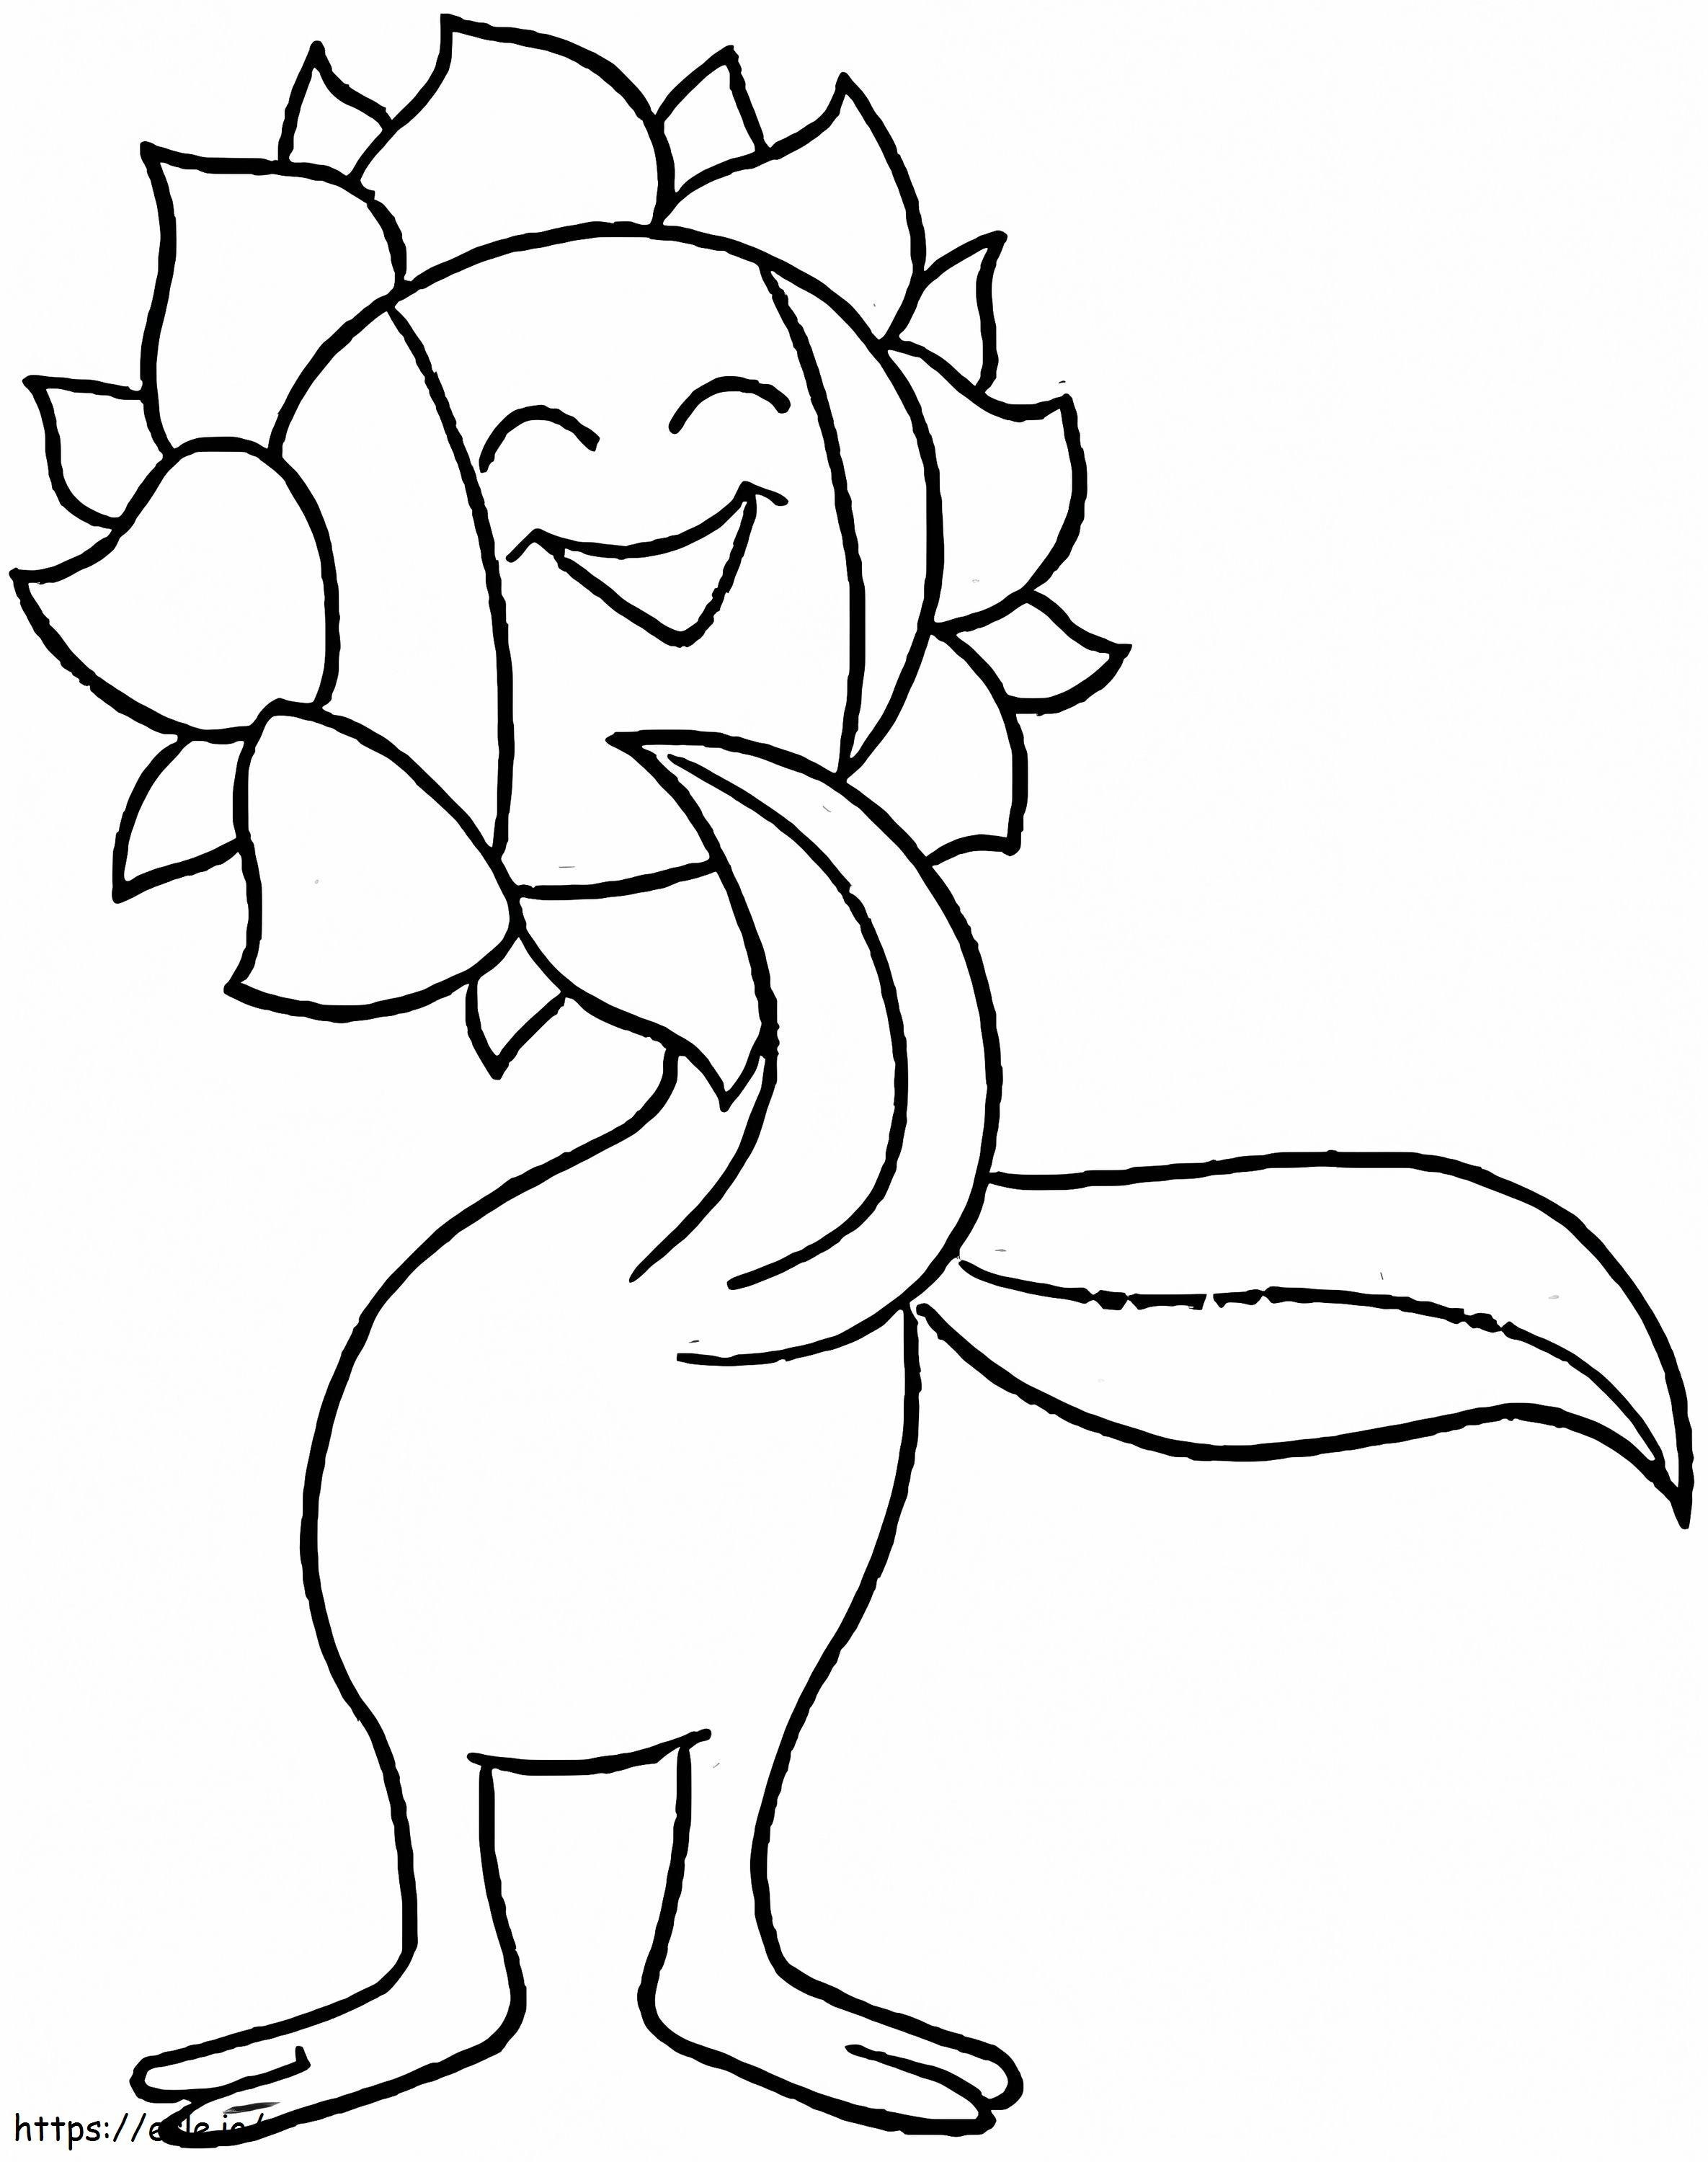 Happy Sunflora coloring page